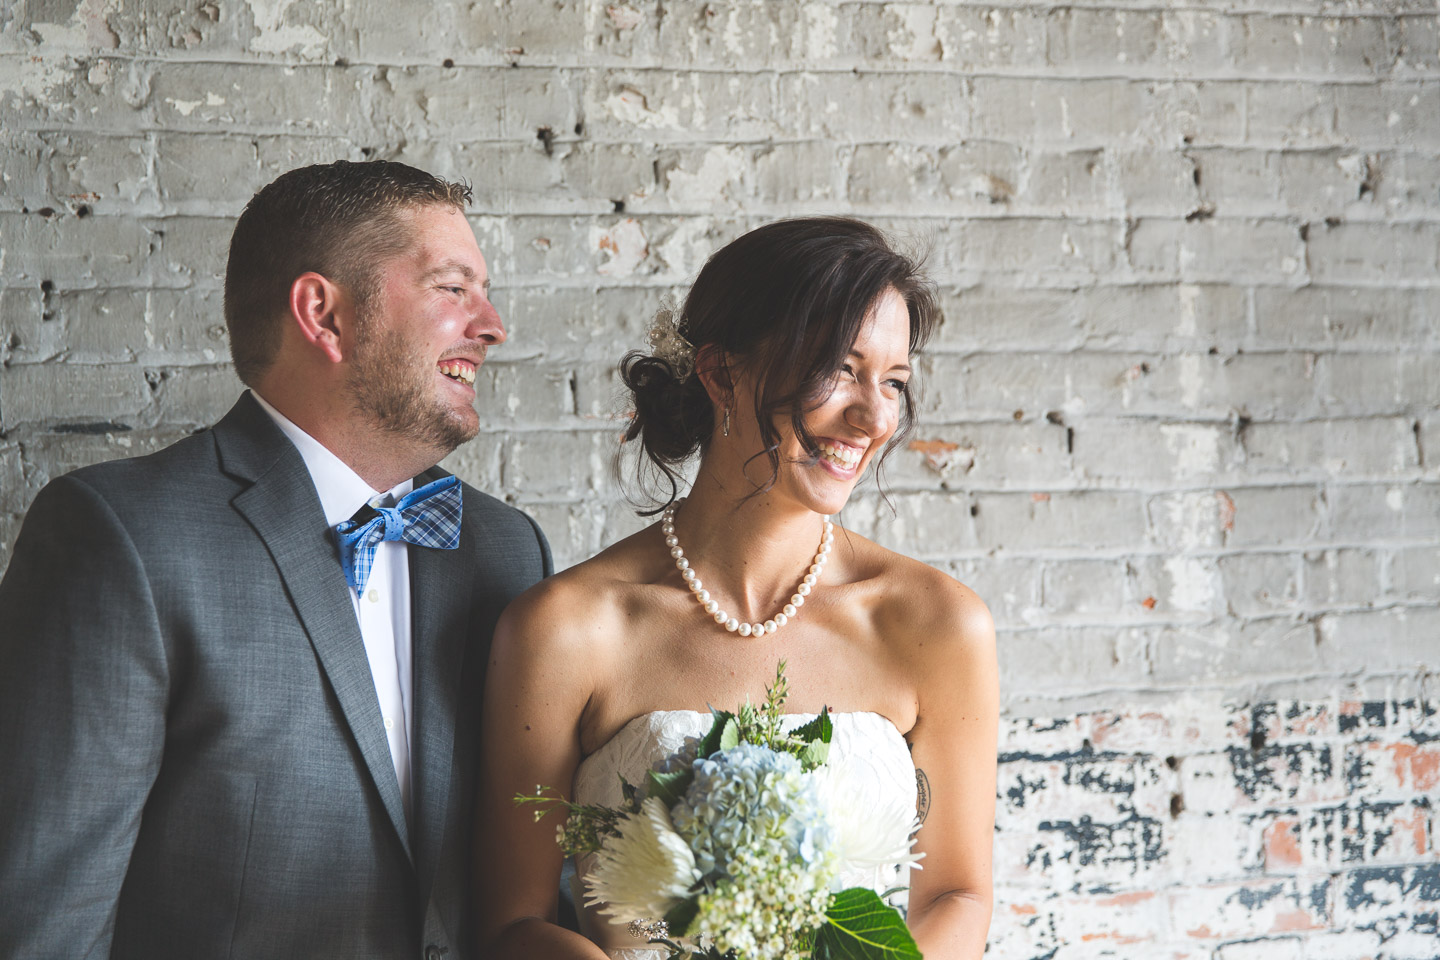 Detroit-Michigan-Wedding-Photographer-Photography-Ford-Piquette-Plant-Bride-Groom-Laugh-Smile-Happiness-Love